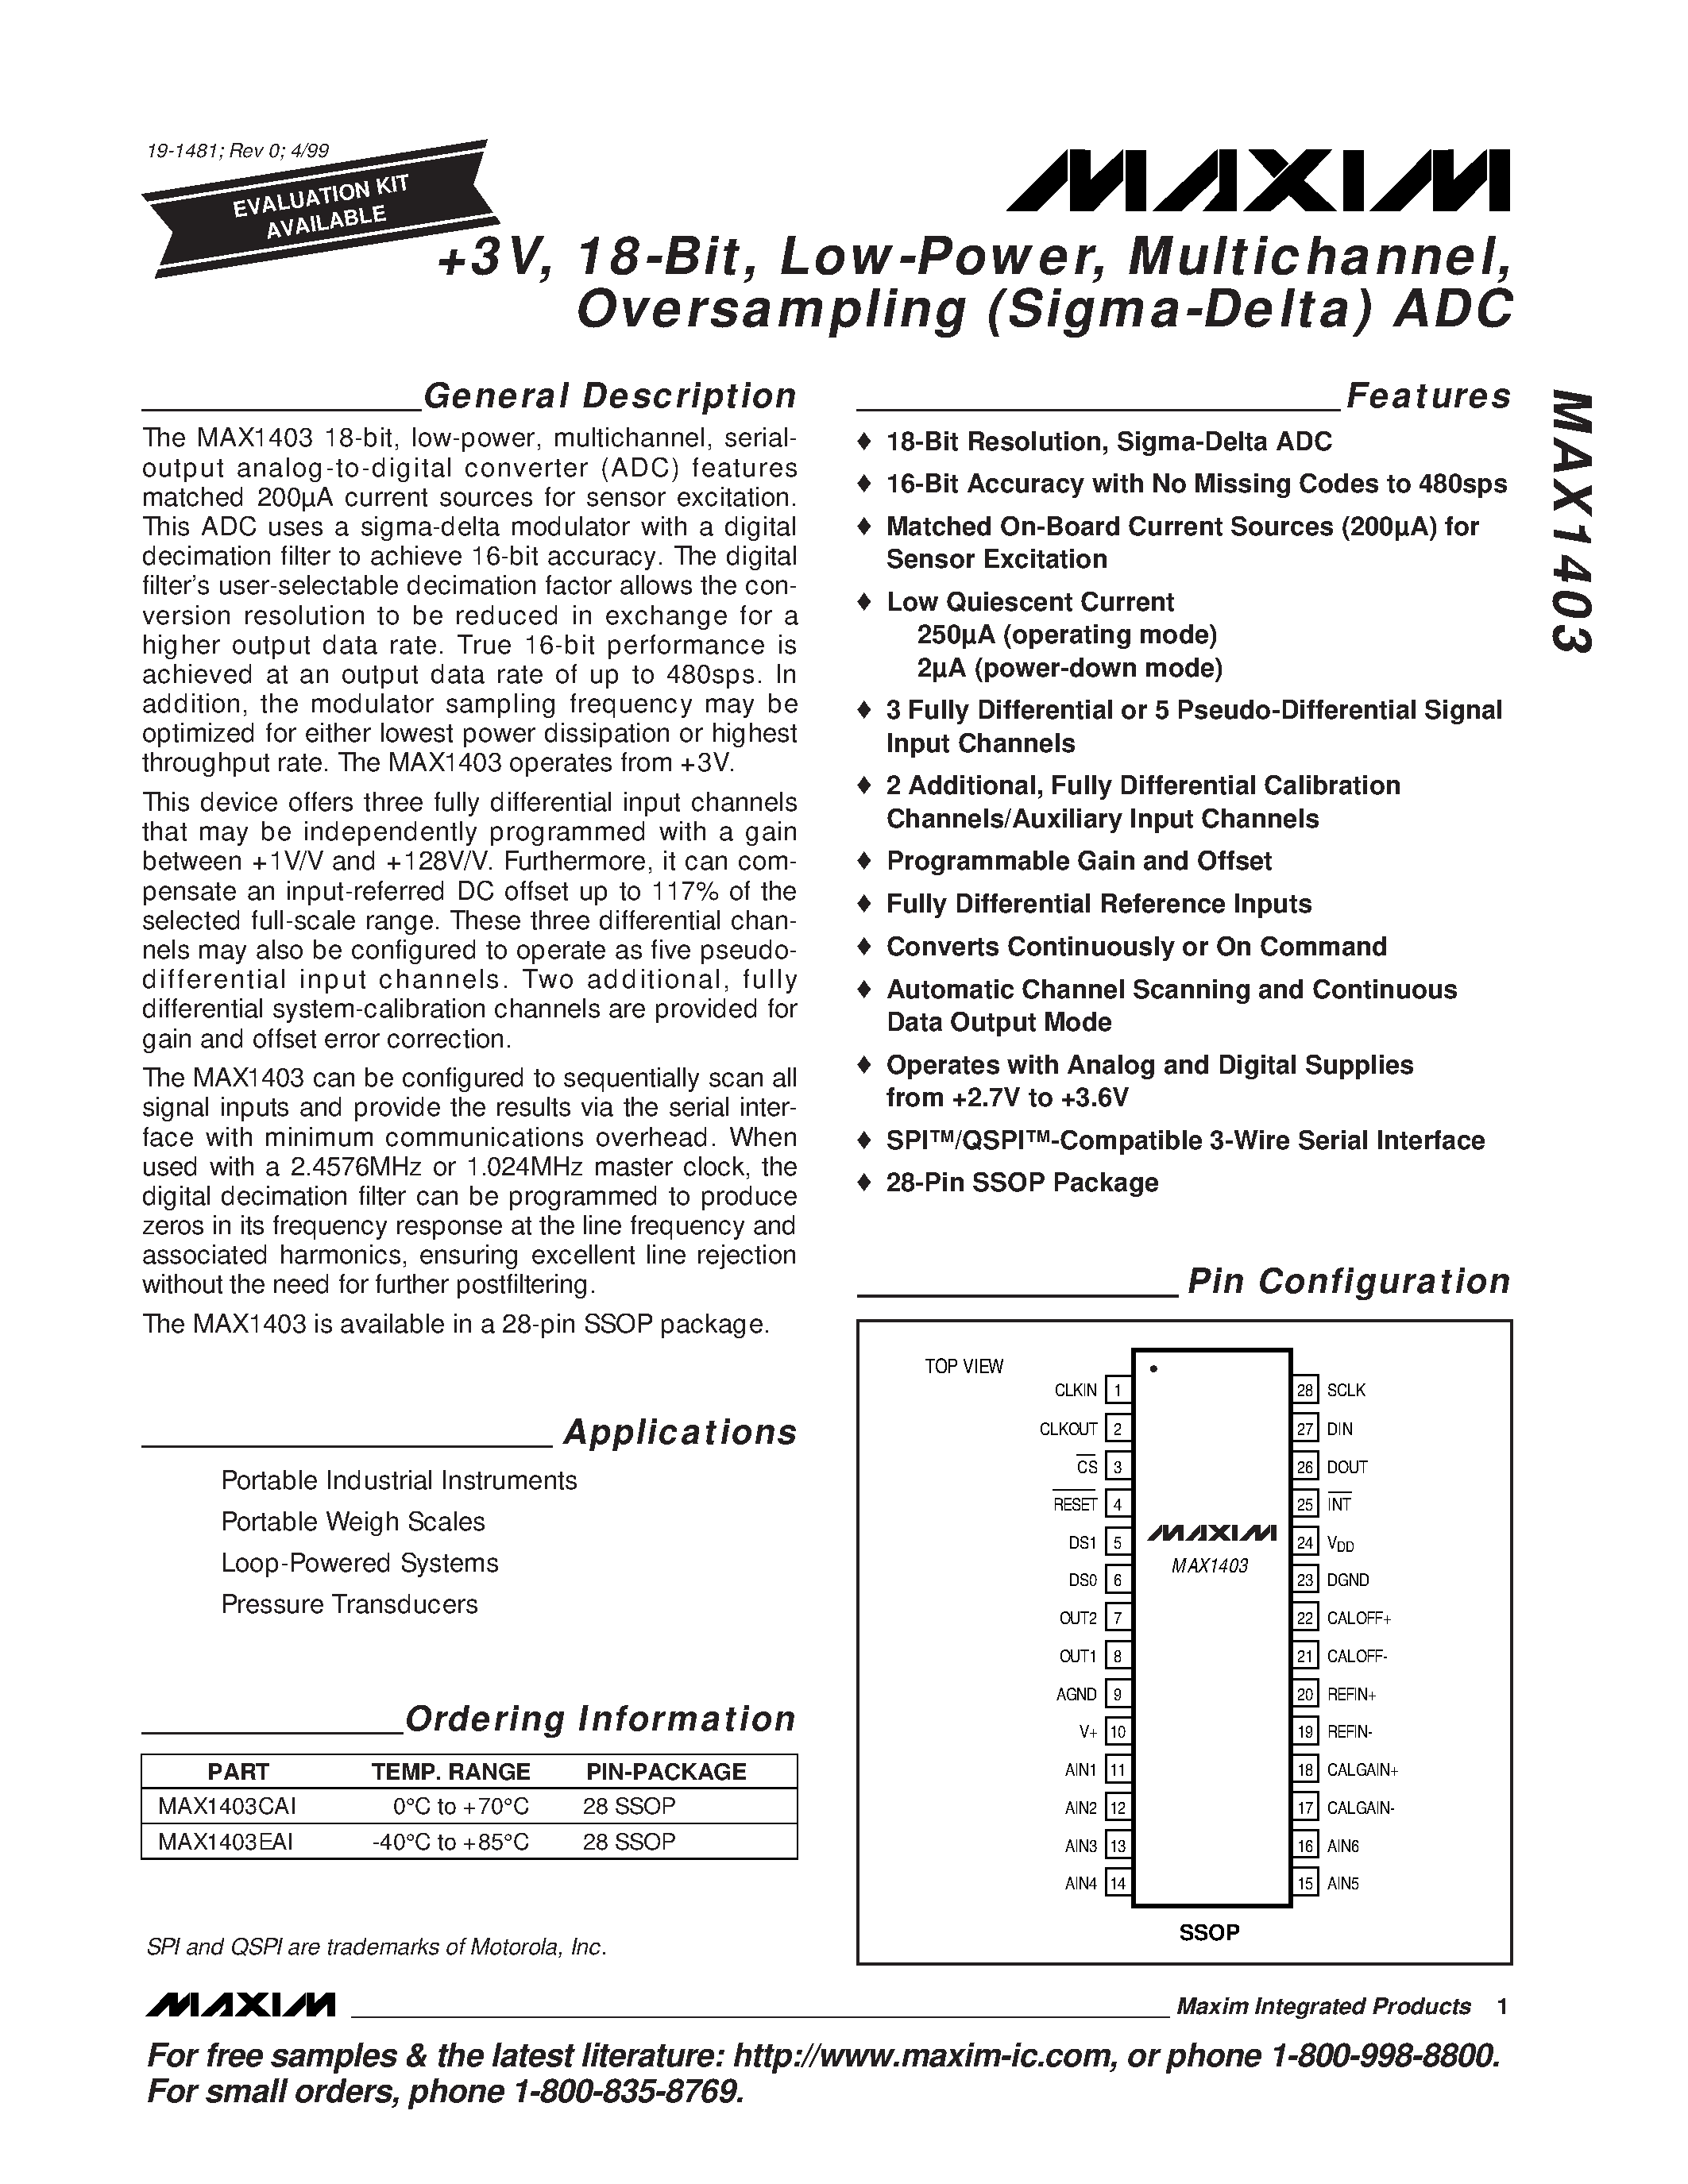 Datasheet MAX1403EAI - +3V / 18-Bit / Low-Power / Multichannel / Oversampling Sigma-Delta ADC page 1